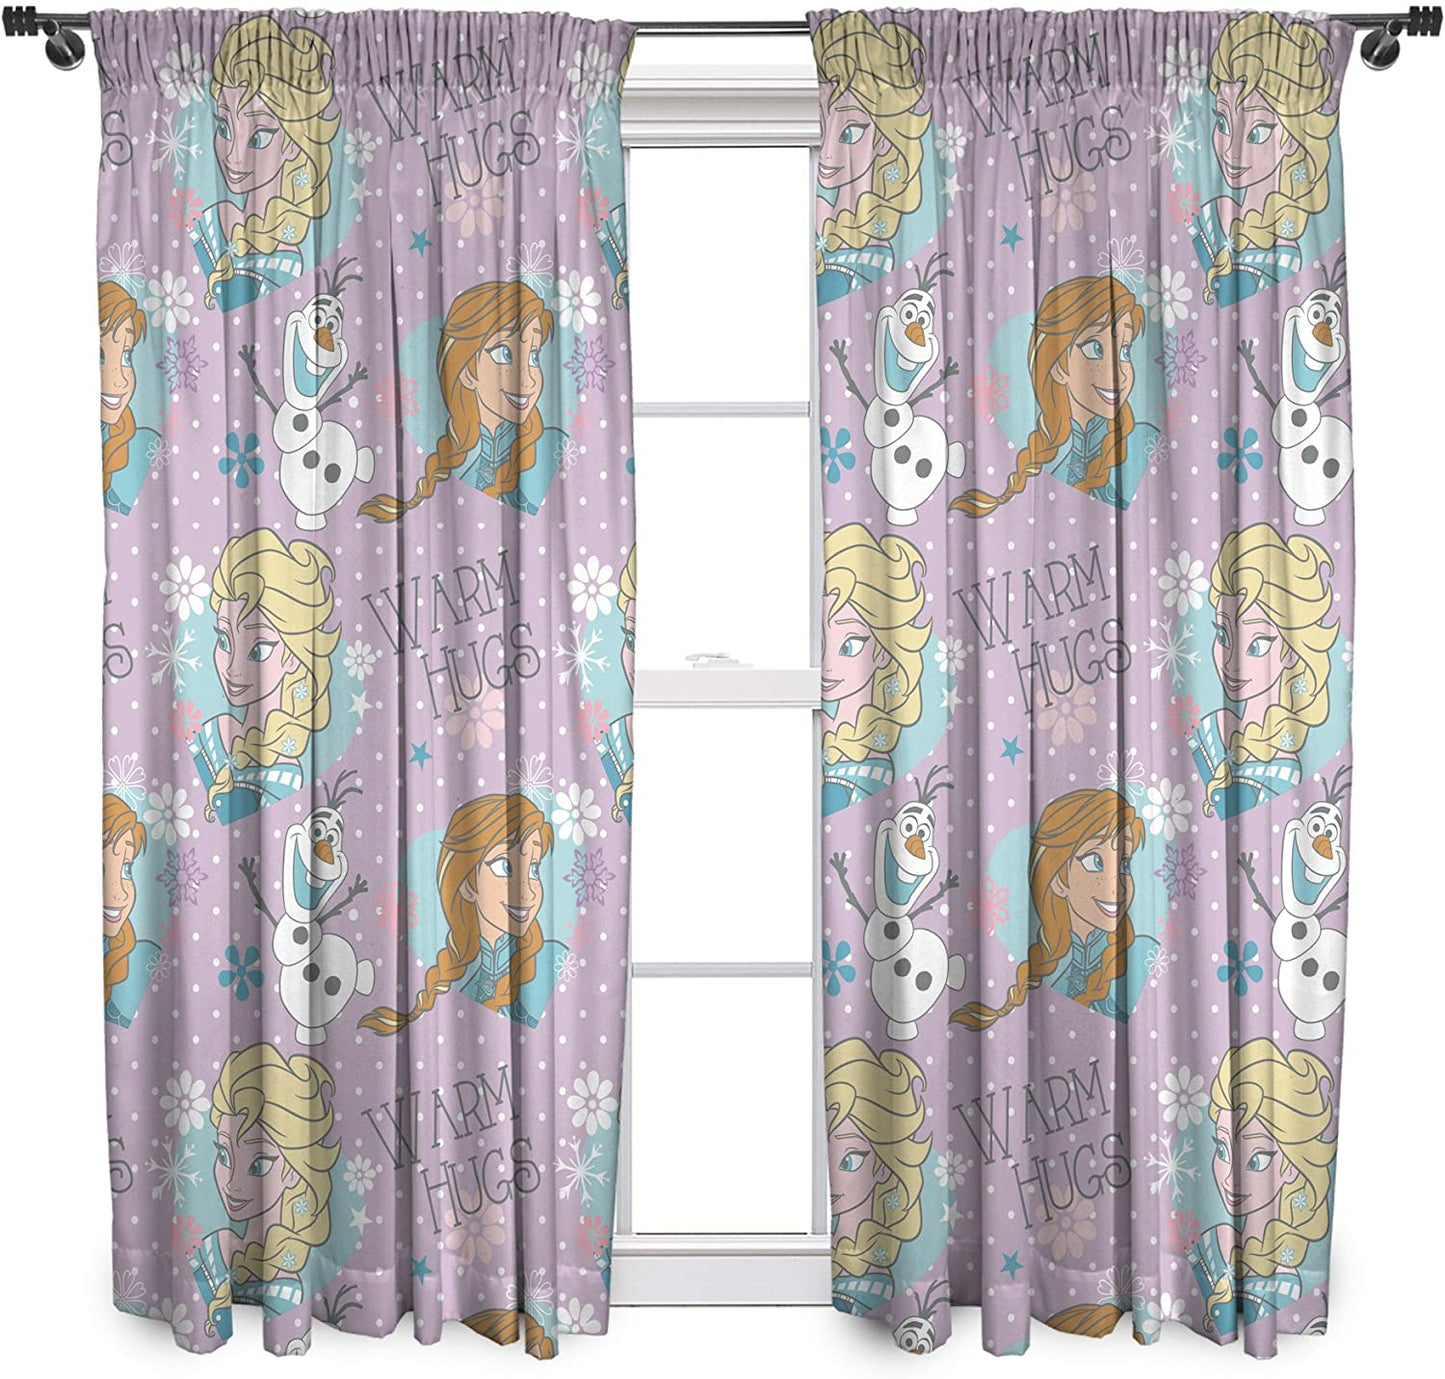 Disney Frozen 'Crystal' 66" x 72" Unlined Pencil Pleat Character Curtains